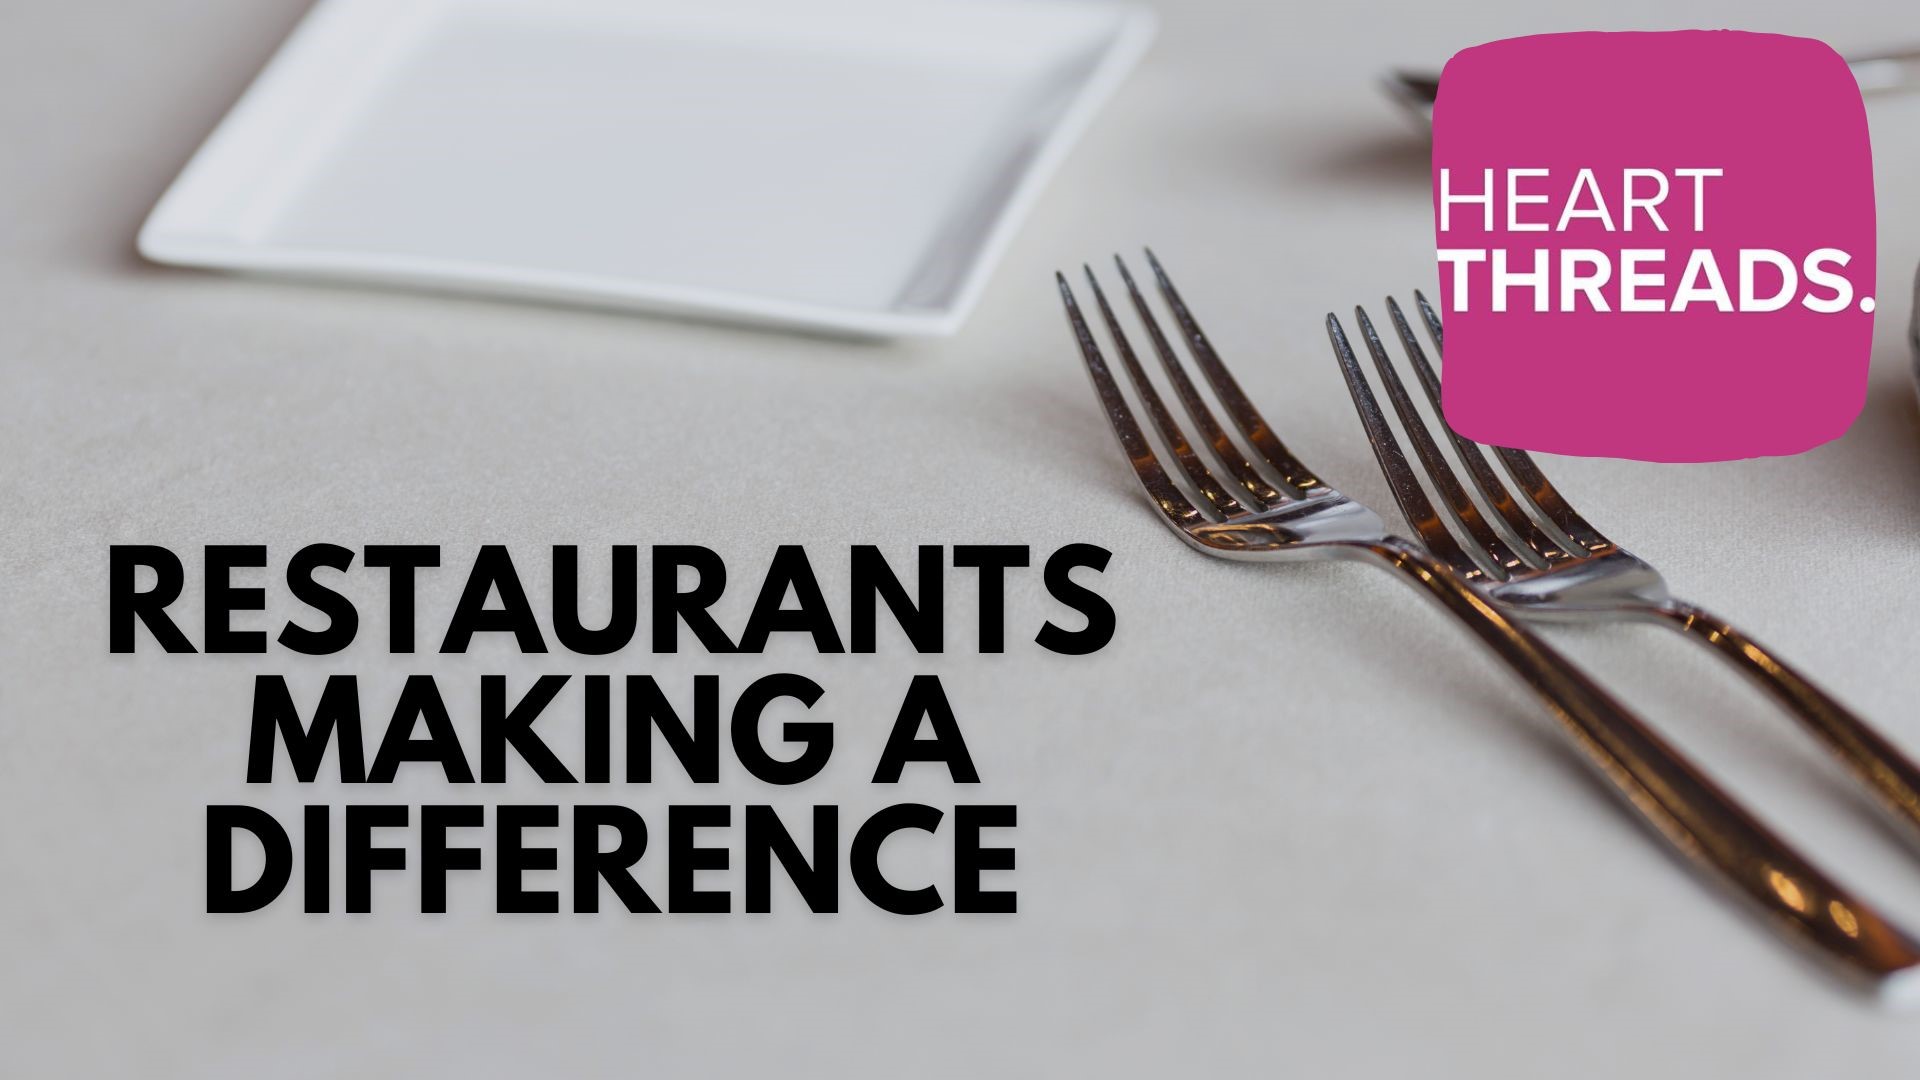 Heartwarming stories of restaurants and cafes from across the U.S. that are making a difference in their communities.